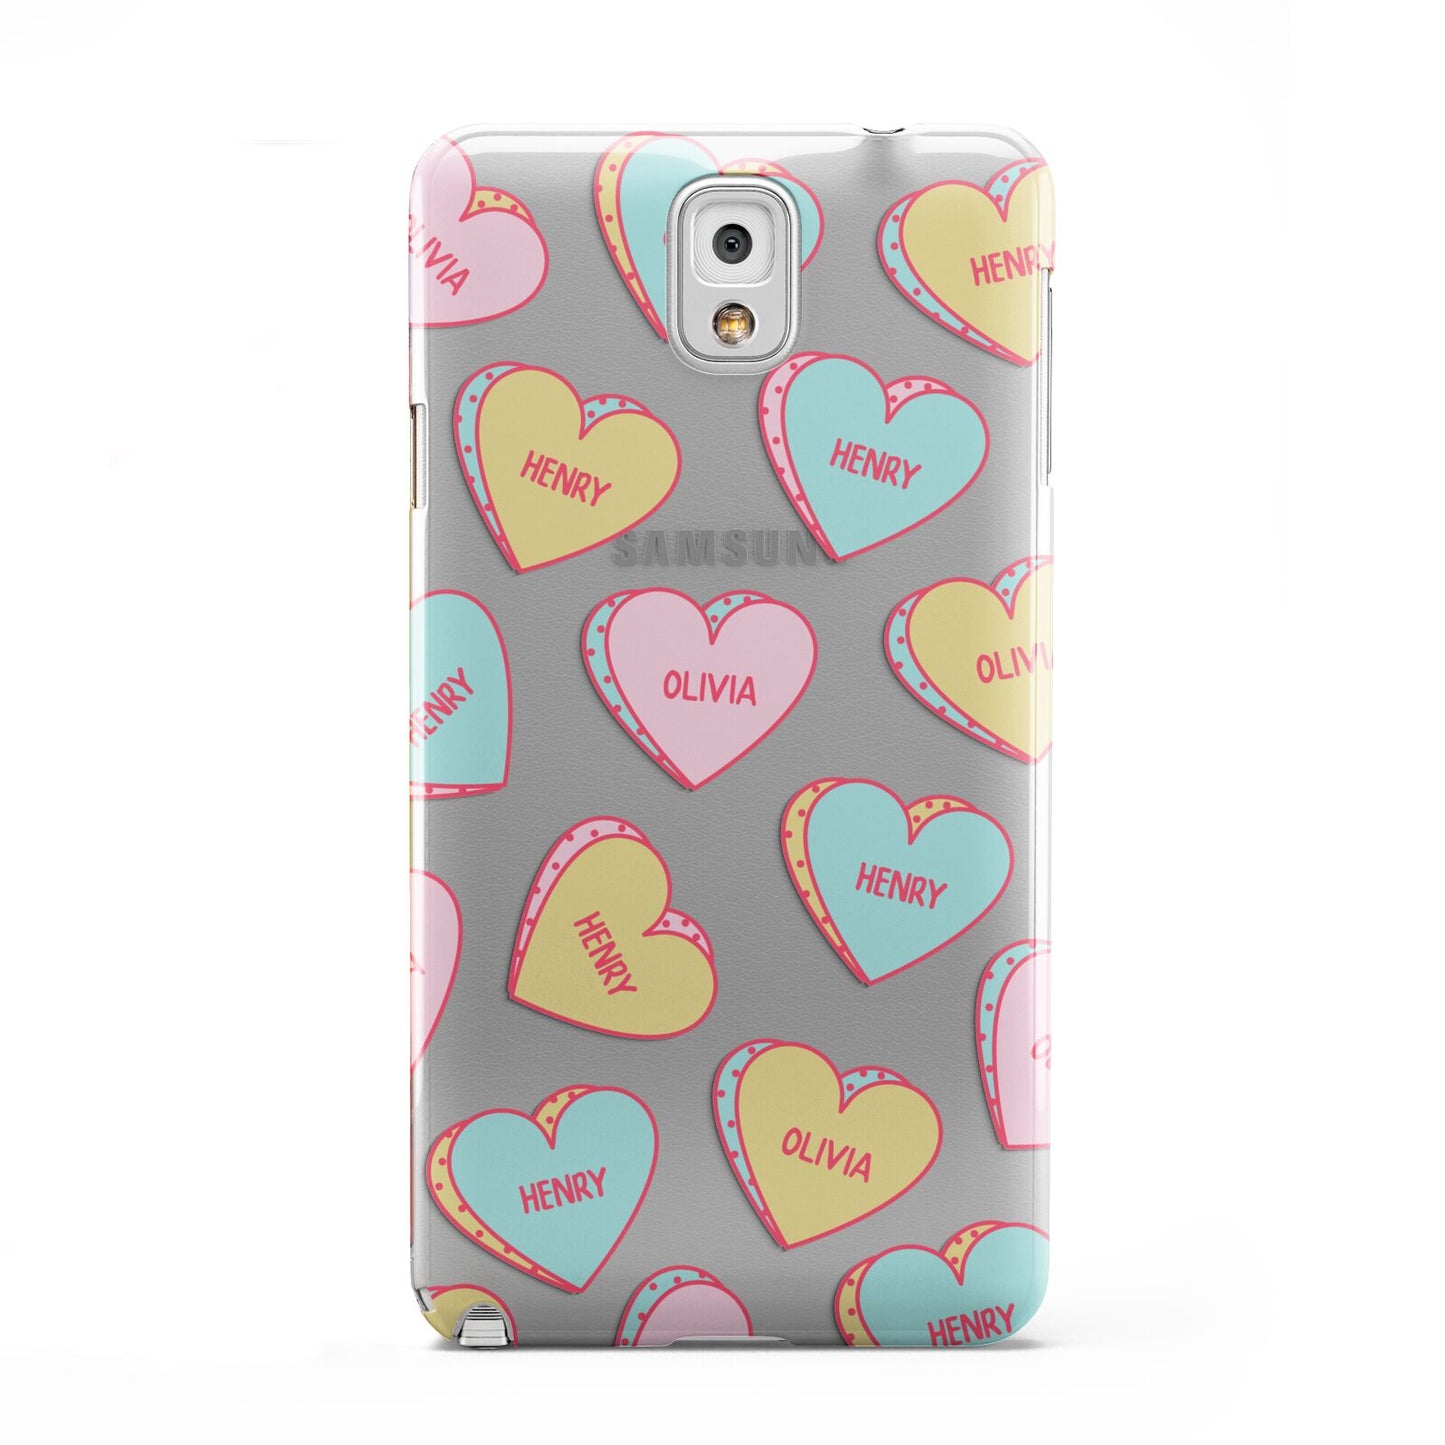 Personalised Heart Sweets Samsung Galaxy Note 3 Case